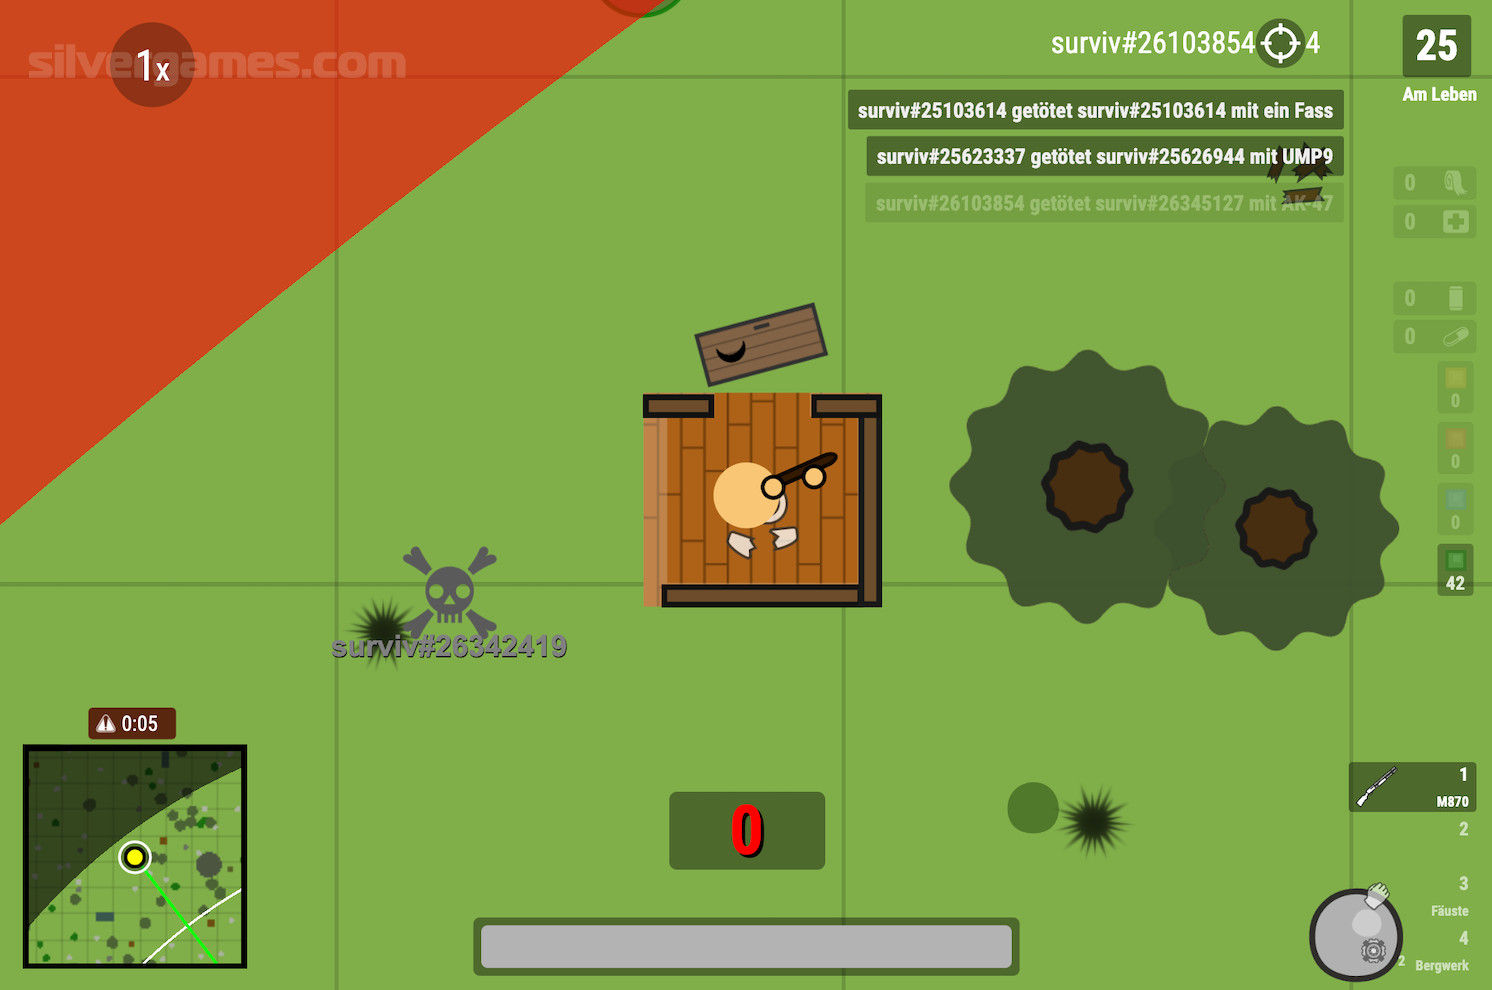 Best Battle Royale Games: Surviv.io, ZombsRoyale.io and Bruh.io